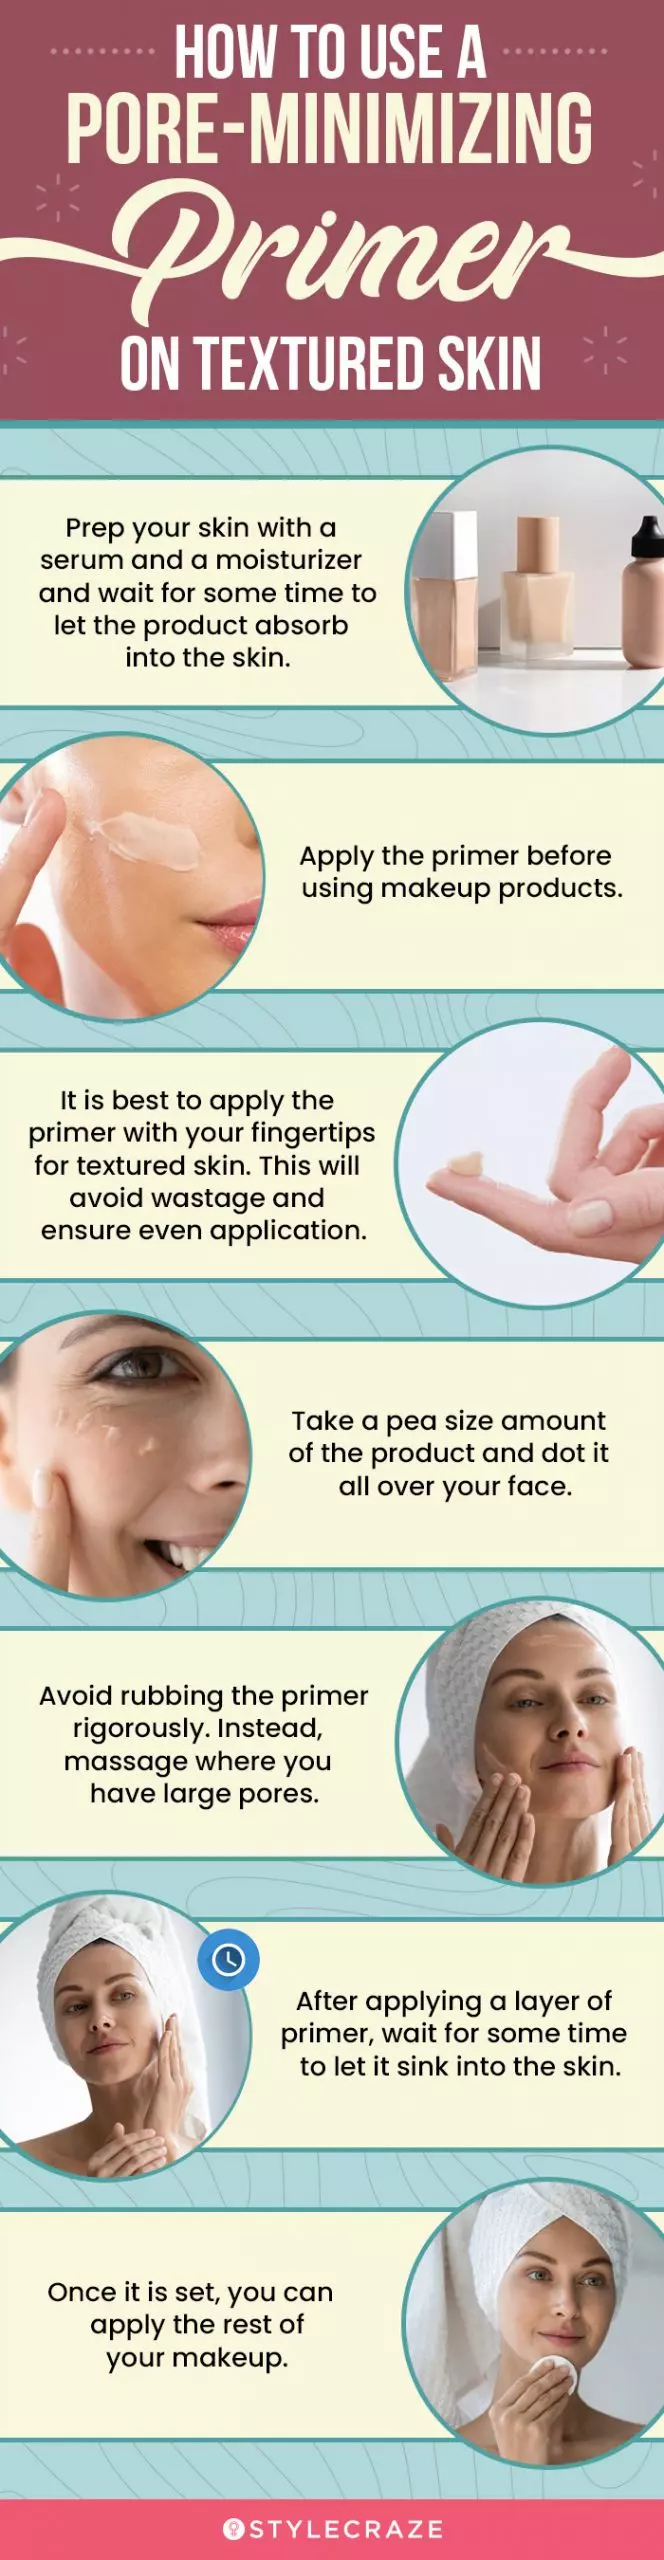 How To Use A Pore Minimizing Primer (infographic)